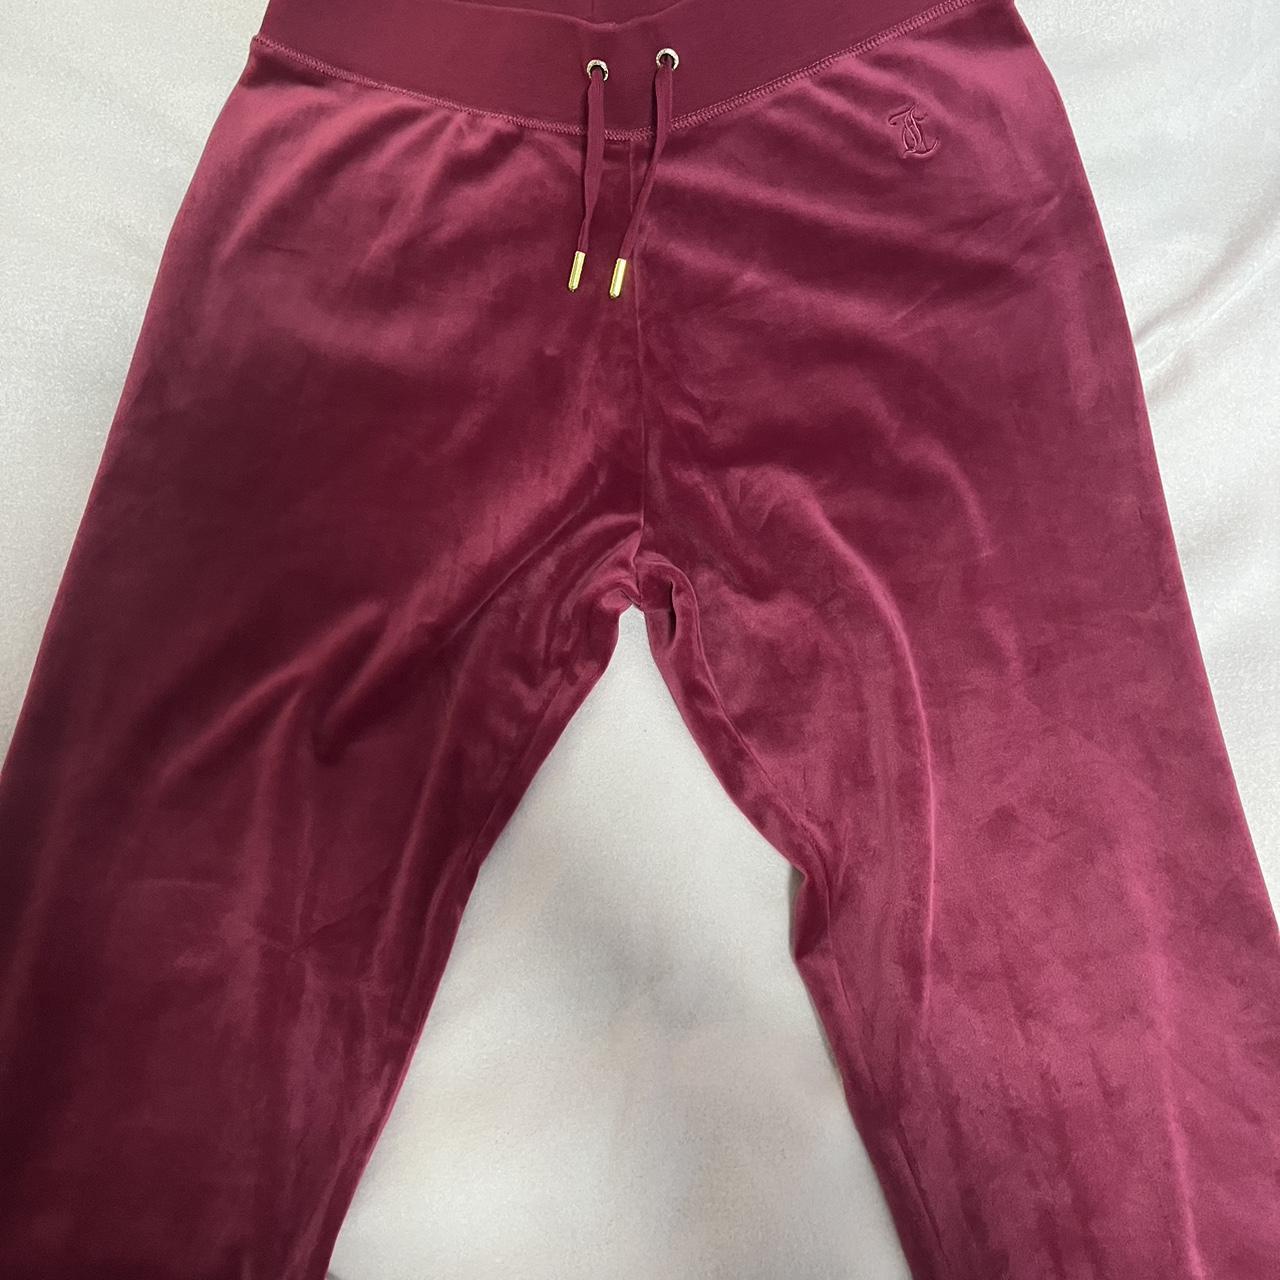 Pink juicy tracksuit bottoms💕 Size large and fits... - Depop